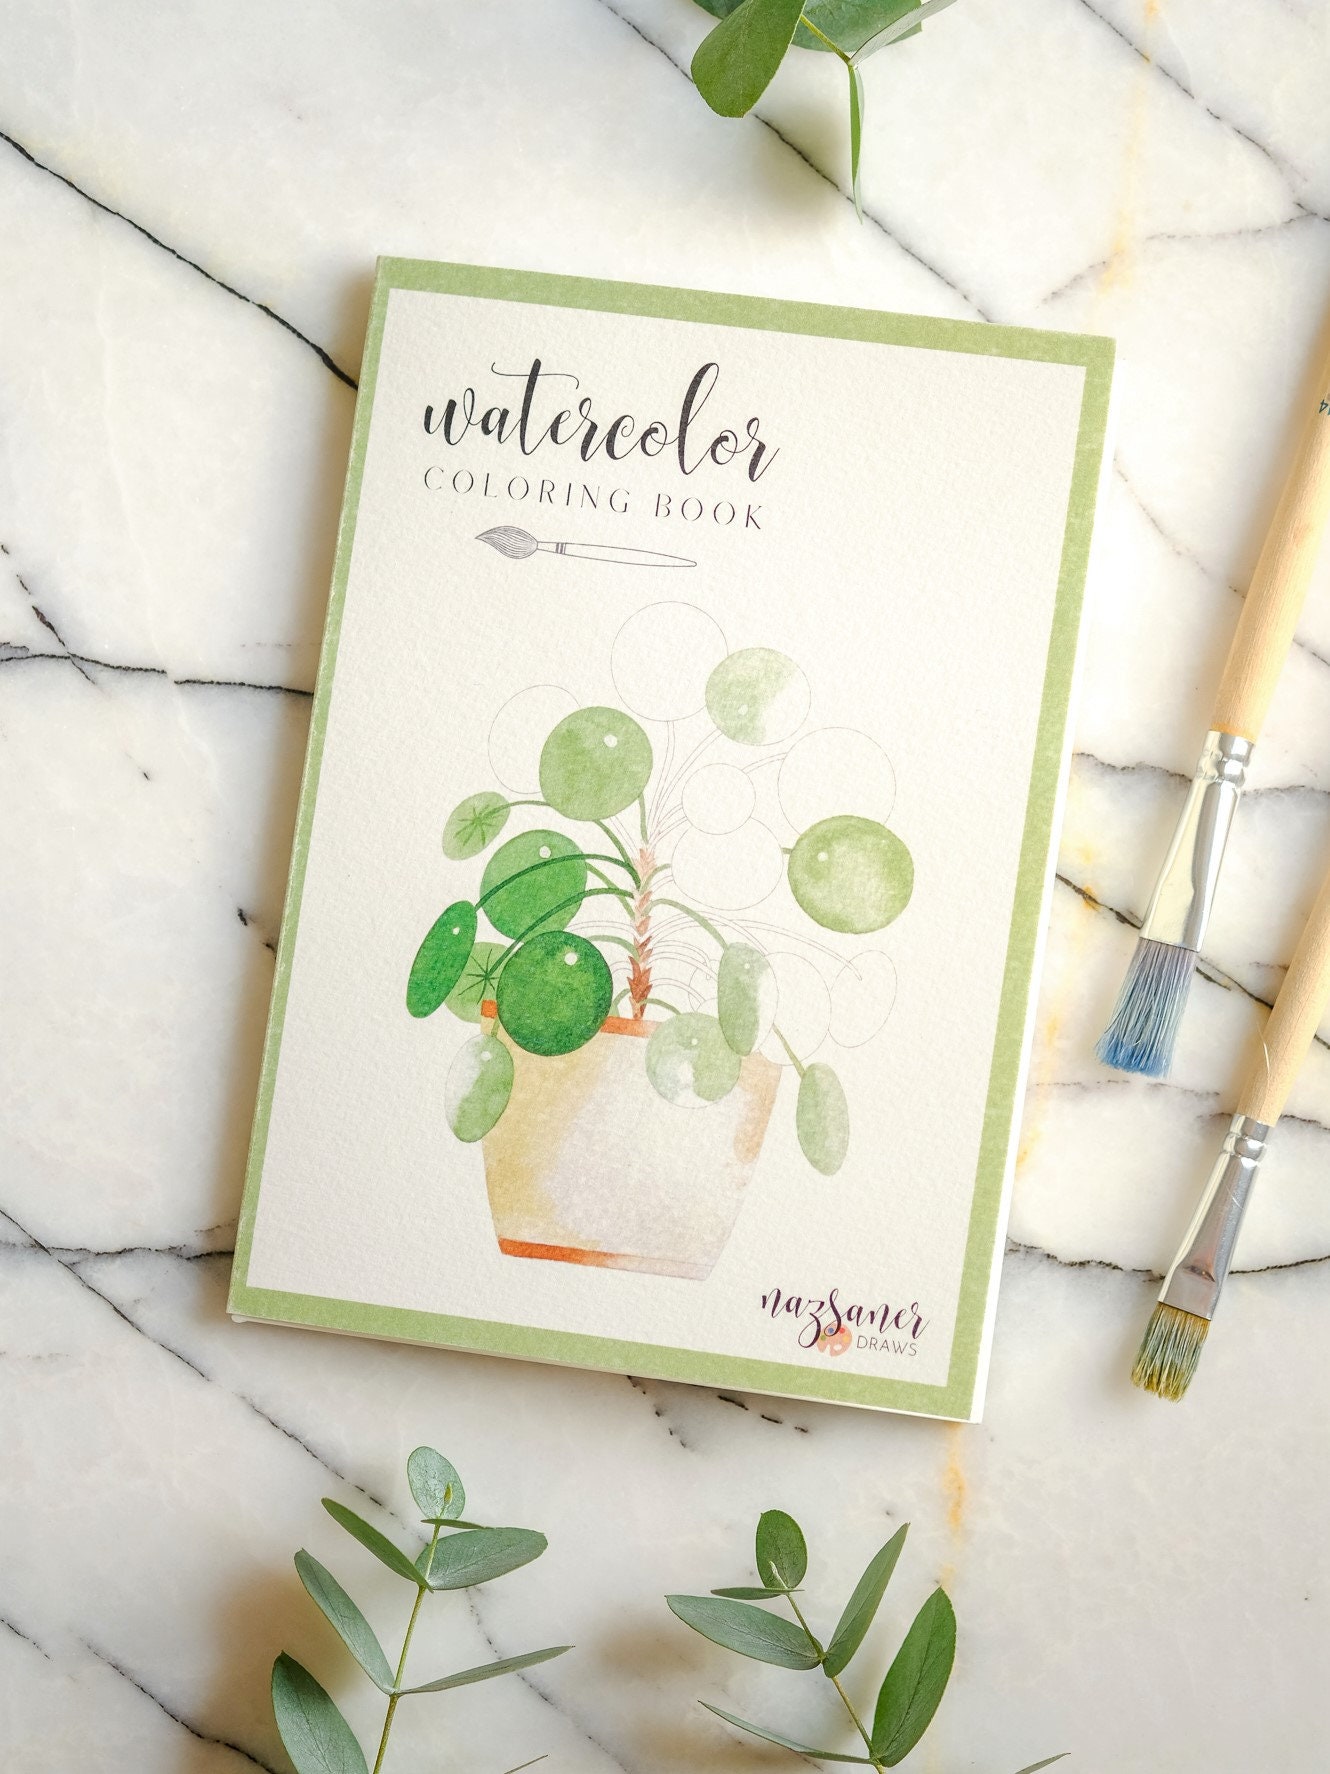 Watercolor Coloring Book House Plants Handmade Illustration Adult Coloring  Book, Workbook Gift 